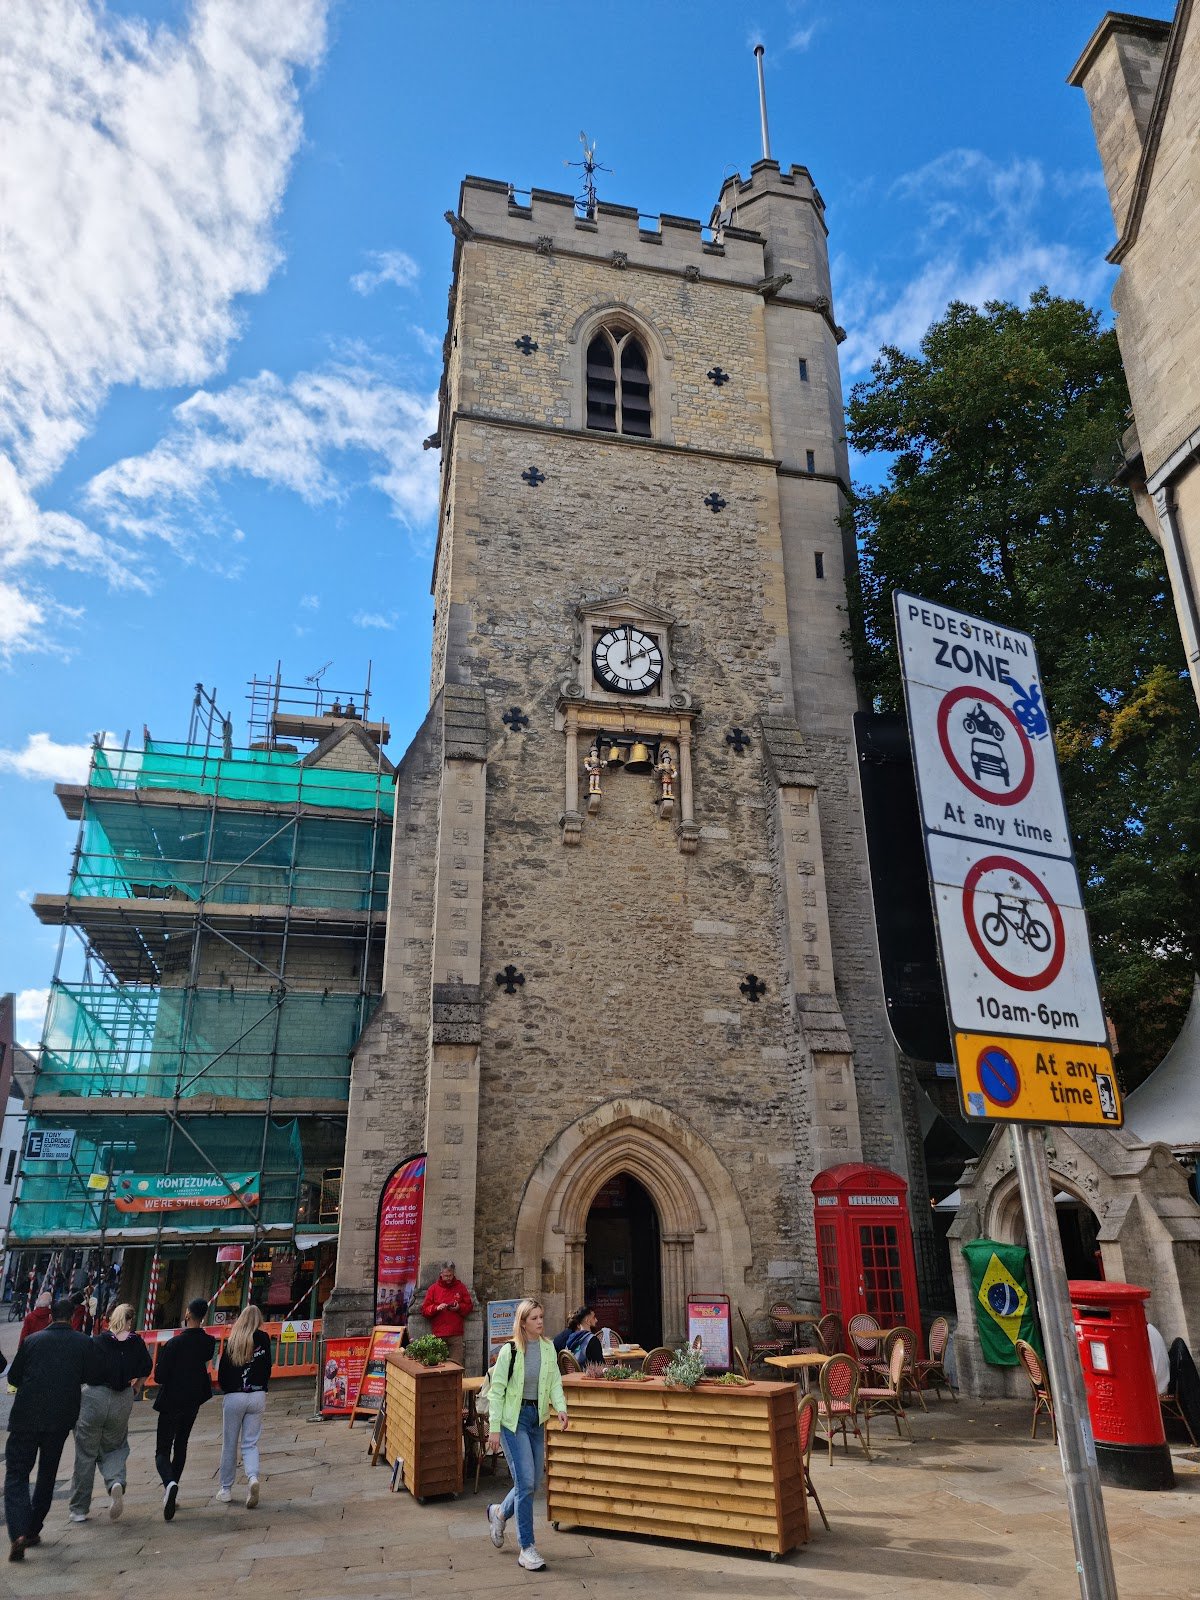 A picture of Carfax Tower